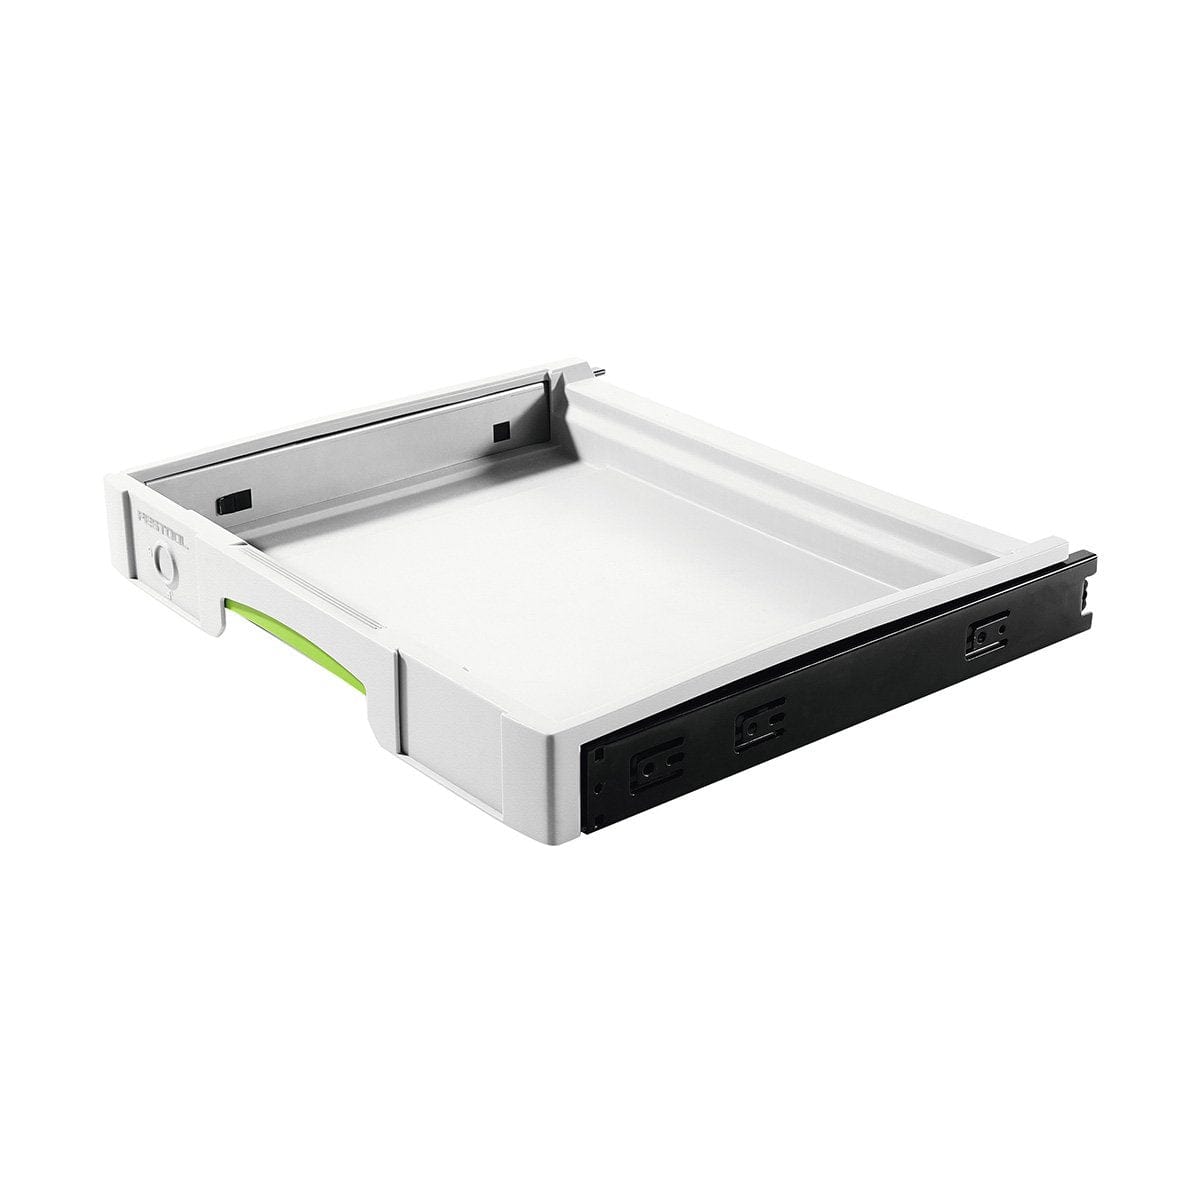 Festool 500692 Systainer Accessories SYS-AZ Drawer